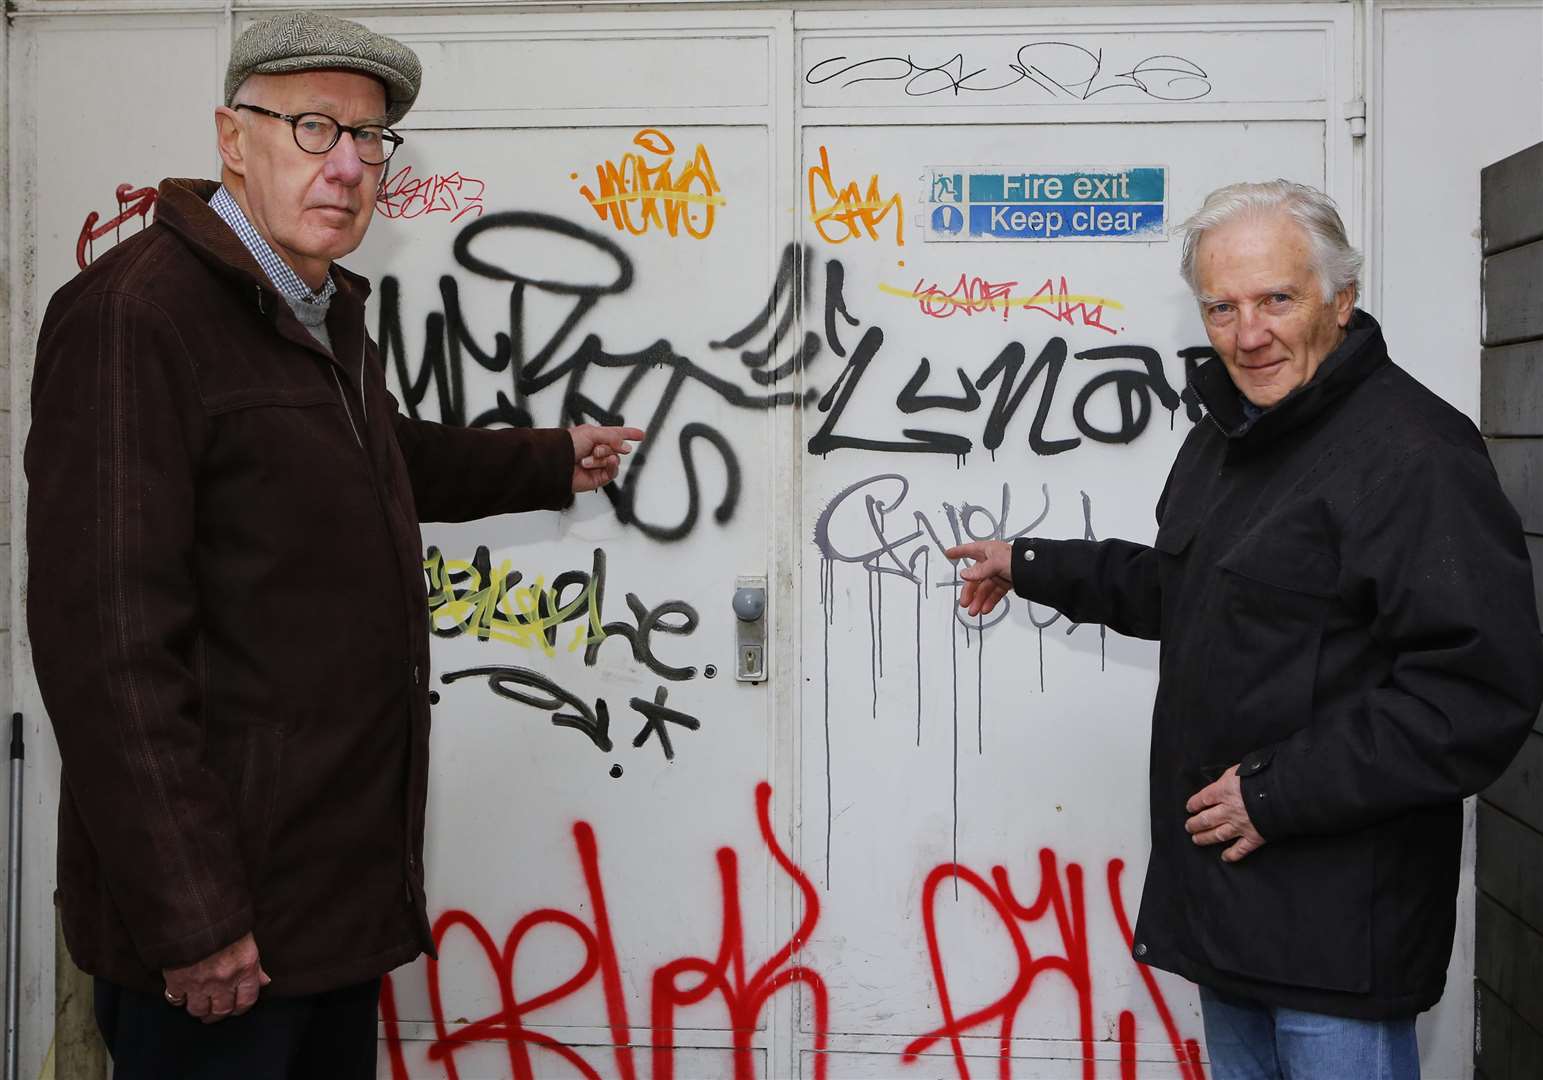 Cllr Michael Dixey and Cllr Nick Eden-Green propose cash rewards and hidden cameras to tackle graffiti problem